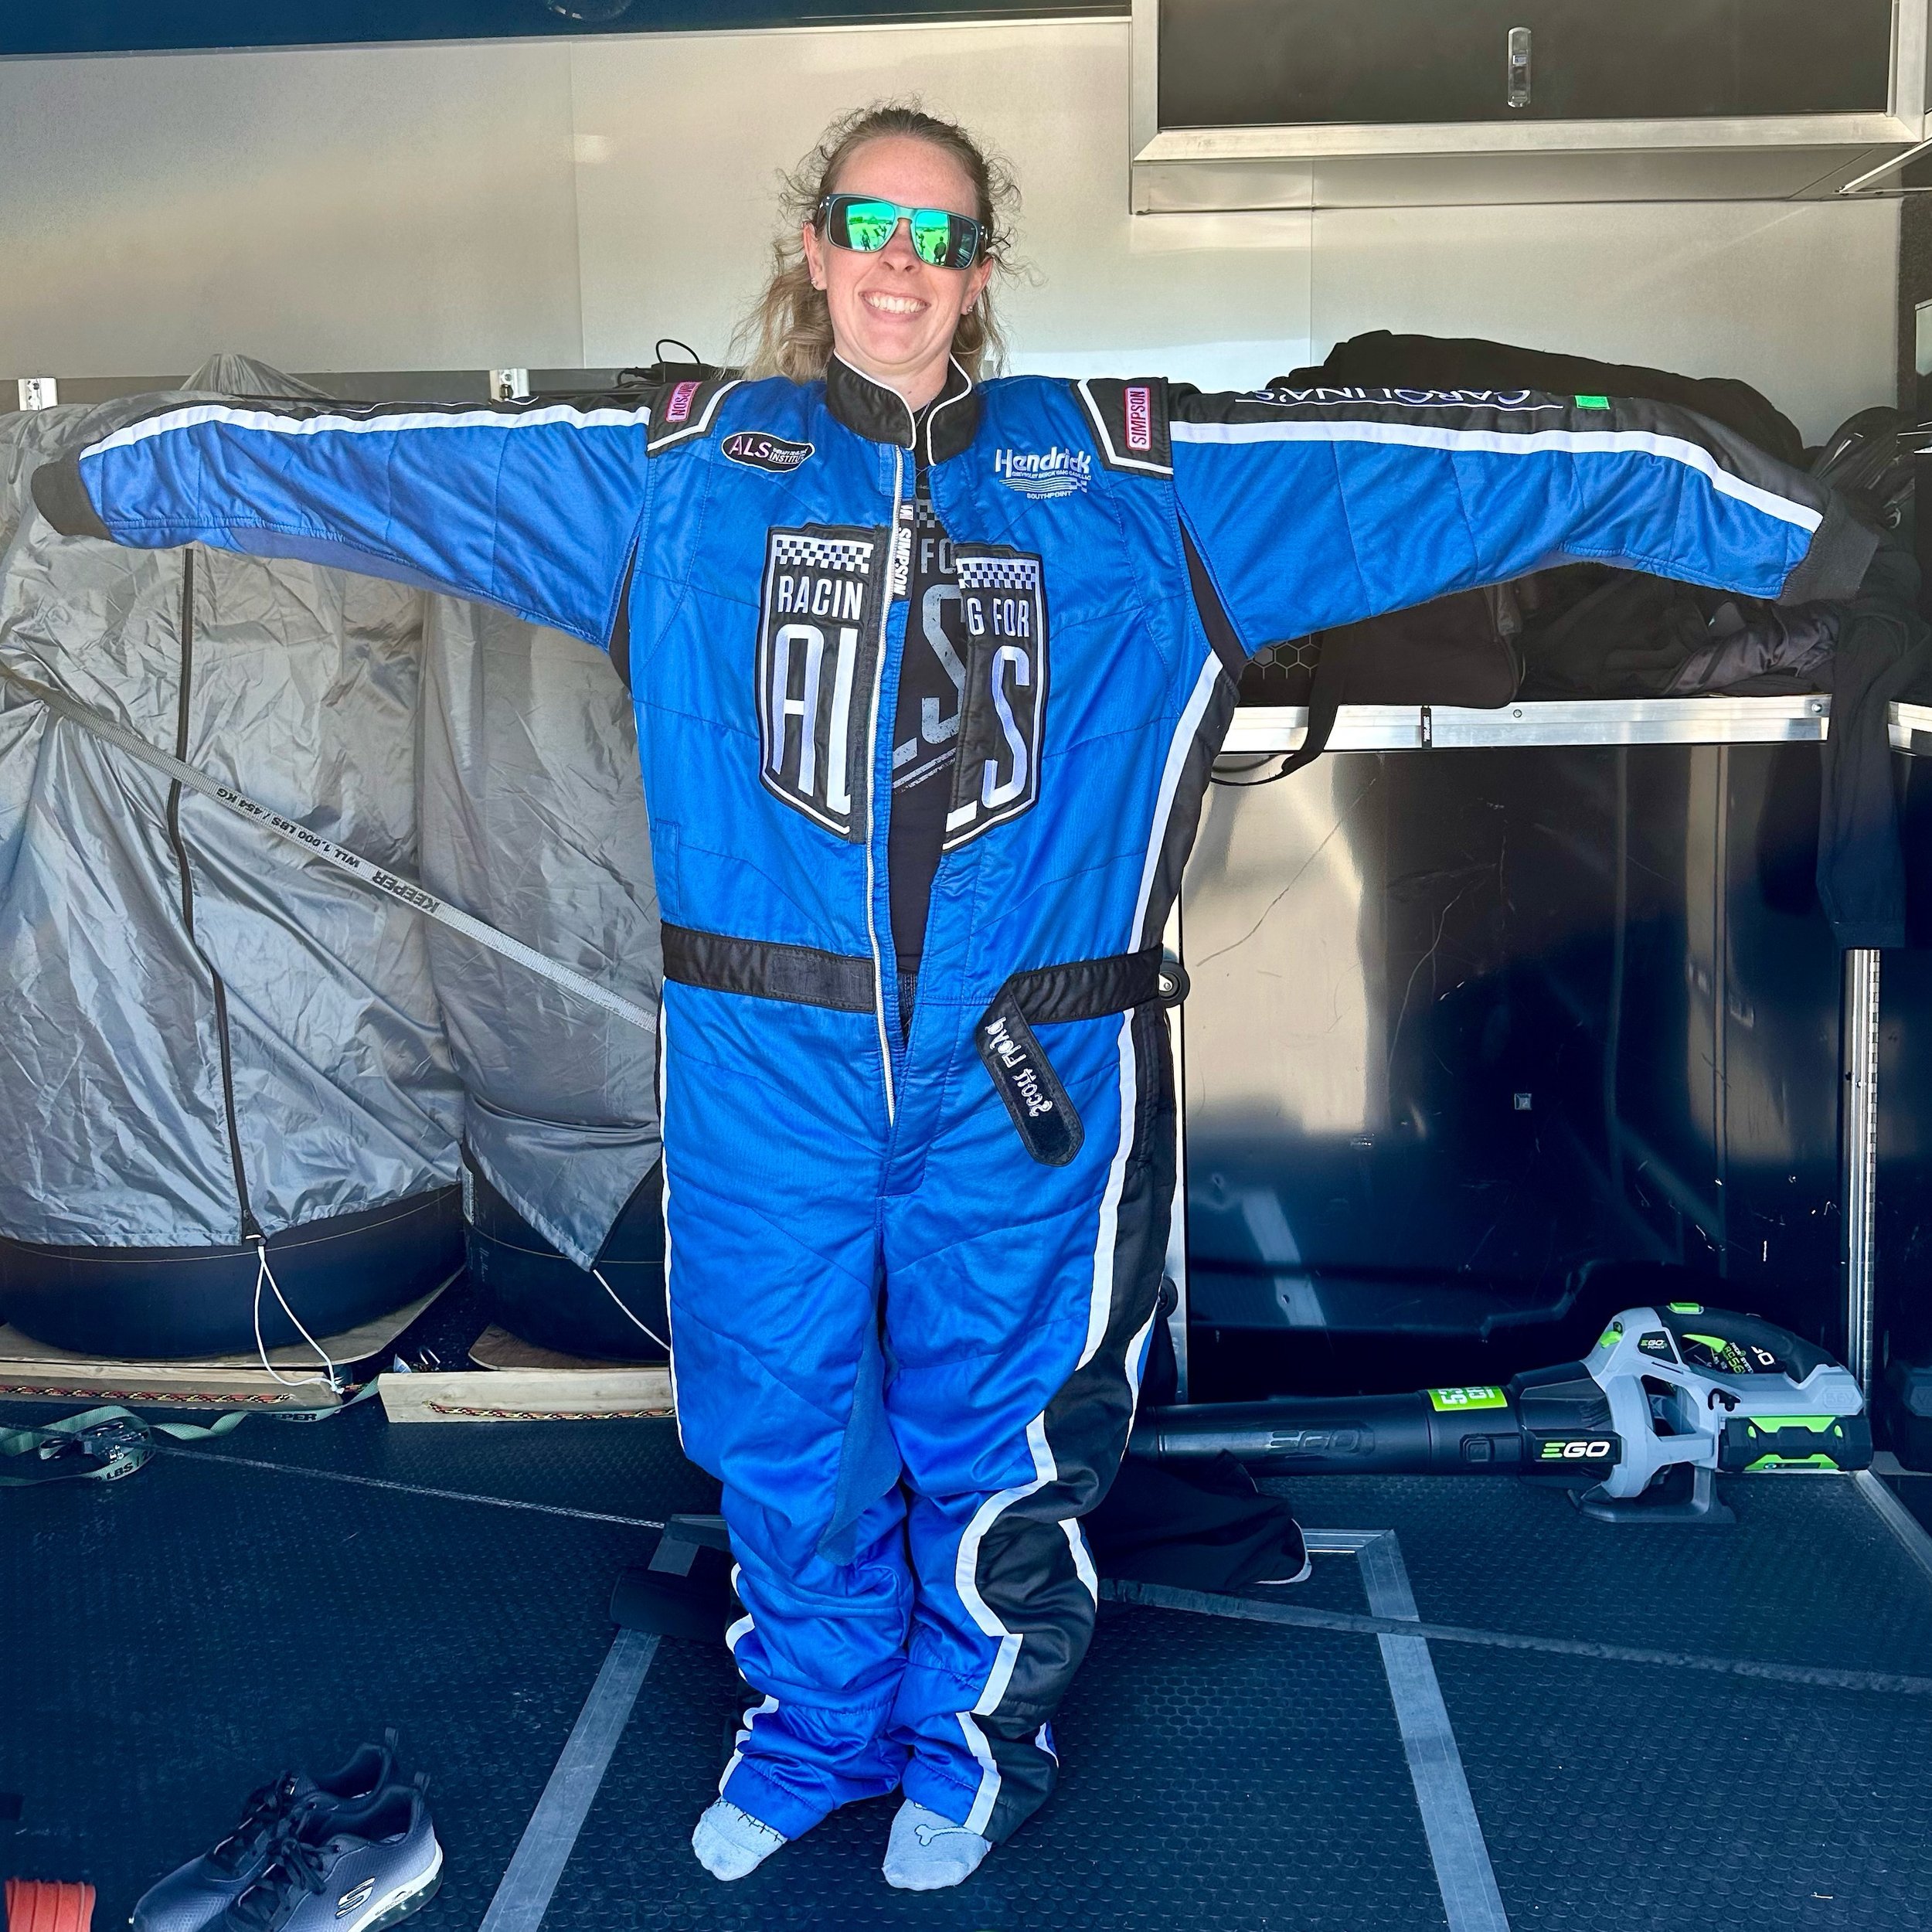 More Shenanigans from VIR - Most people don&rsquo;t get how tall Scott is until they meet him in person&hellip;. @amyambush found out first hand when trying on his fire suit to see if it would work for her to do a ride along with Craver in the @lambo